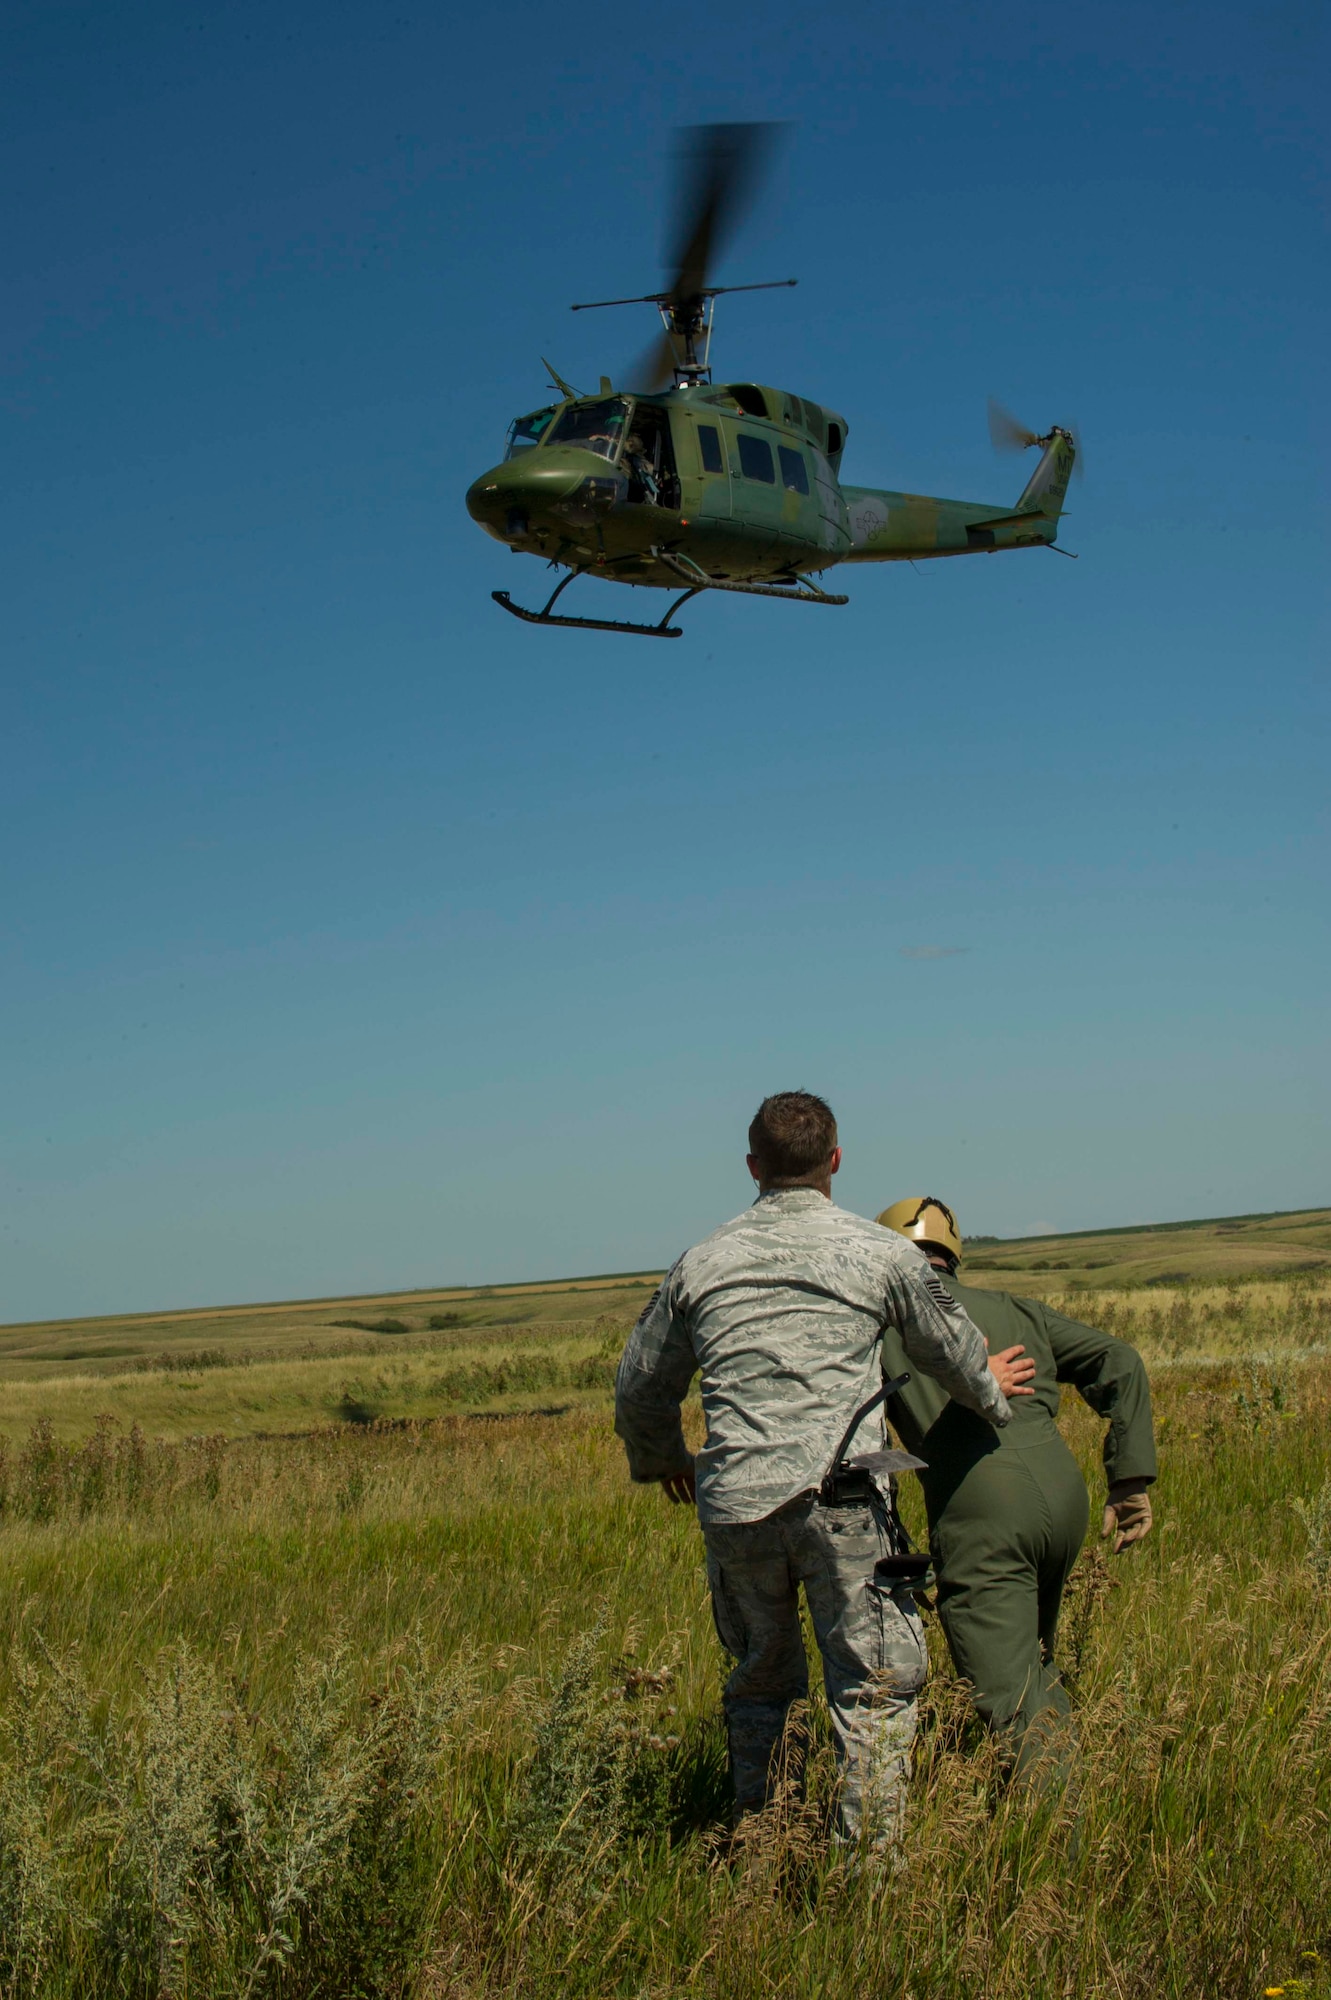 Tech. Sgt. Clifton Cleveland, 5th Operations Support Squadron survival, evasion, resistance and escape specialist, instructs an Airman to run to the helicopter during SERE training in Garrison, N.D., Aug. 11, 2016. During this portion of the training, Airmen were hoisted into the helicopter in a mock-rescue scenario. (U.S. Air Force photo/Senior Airman Apryl Hall)